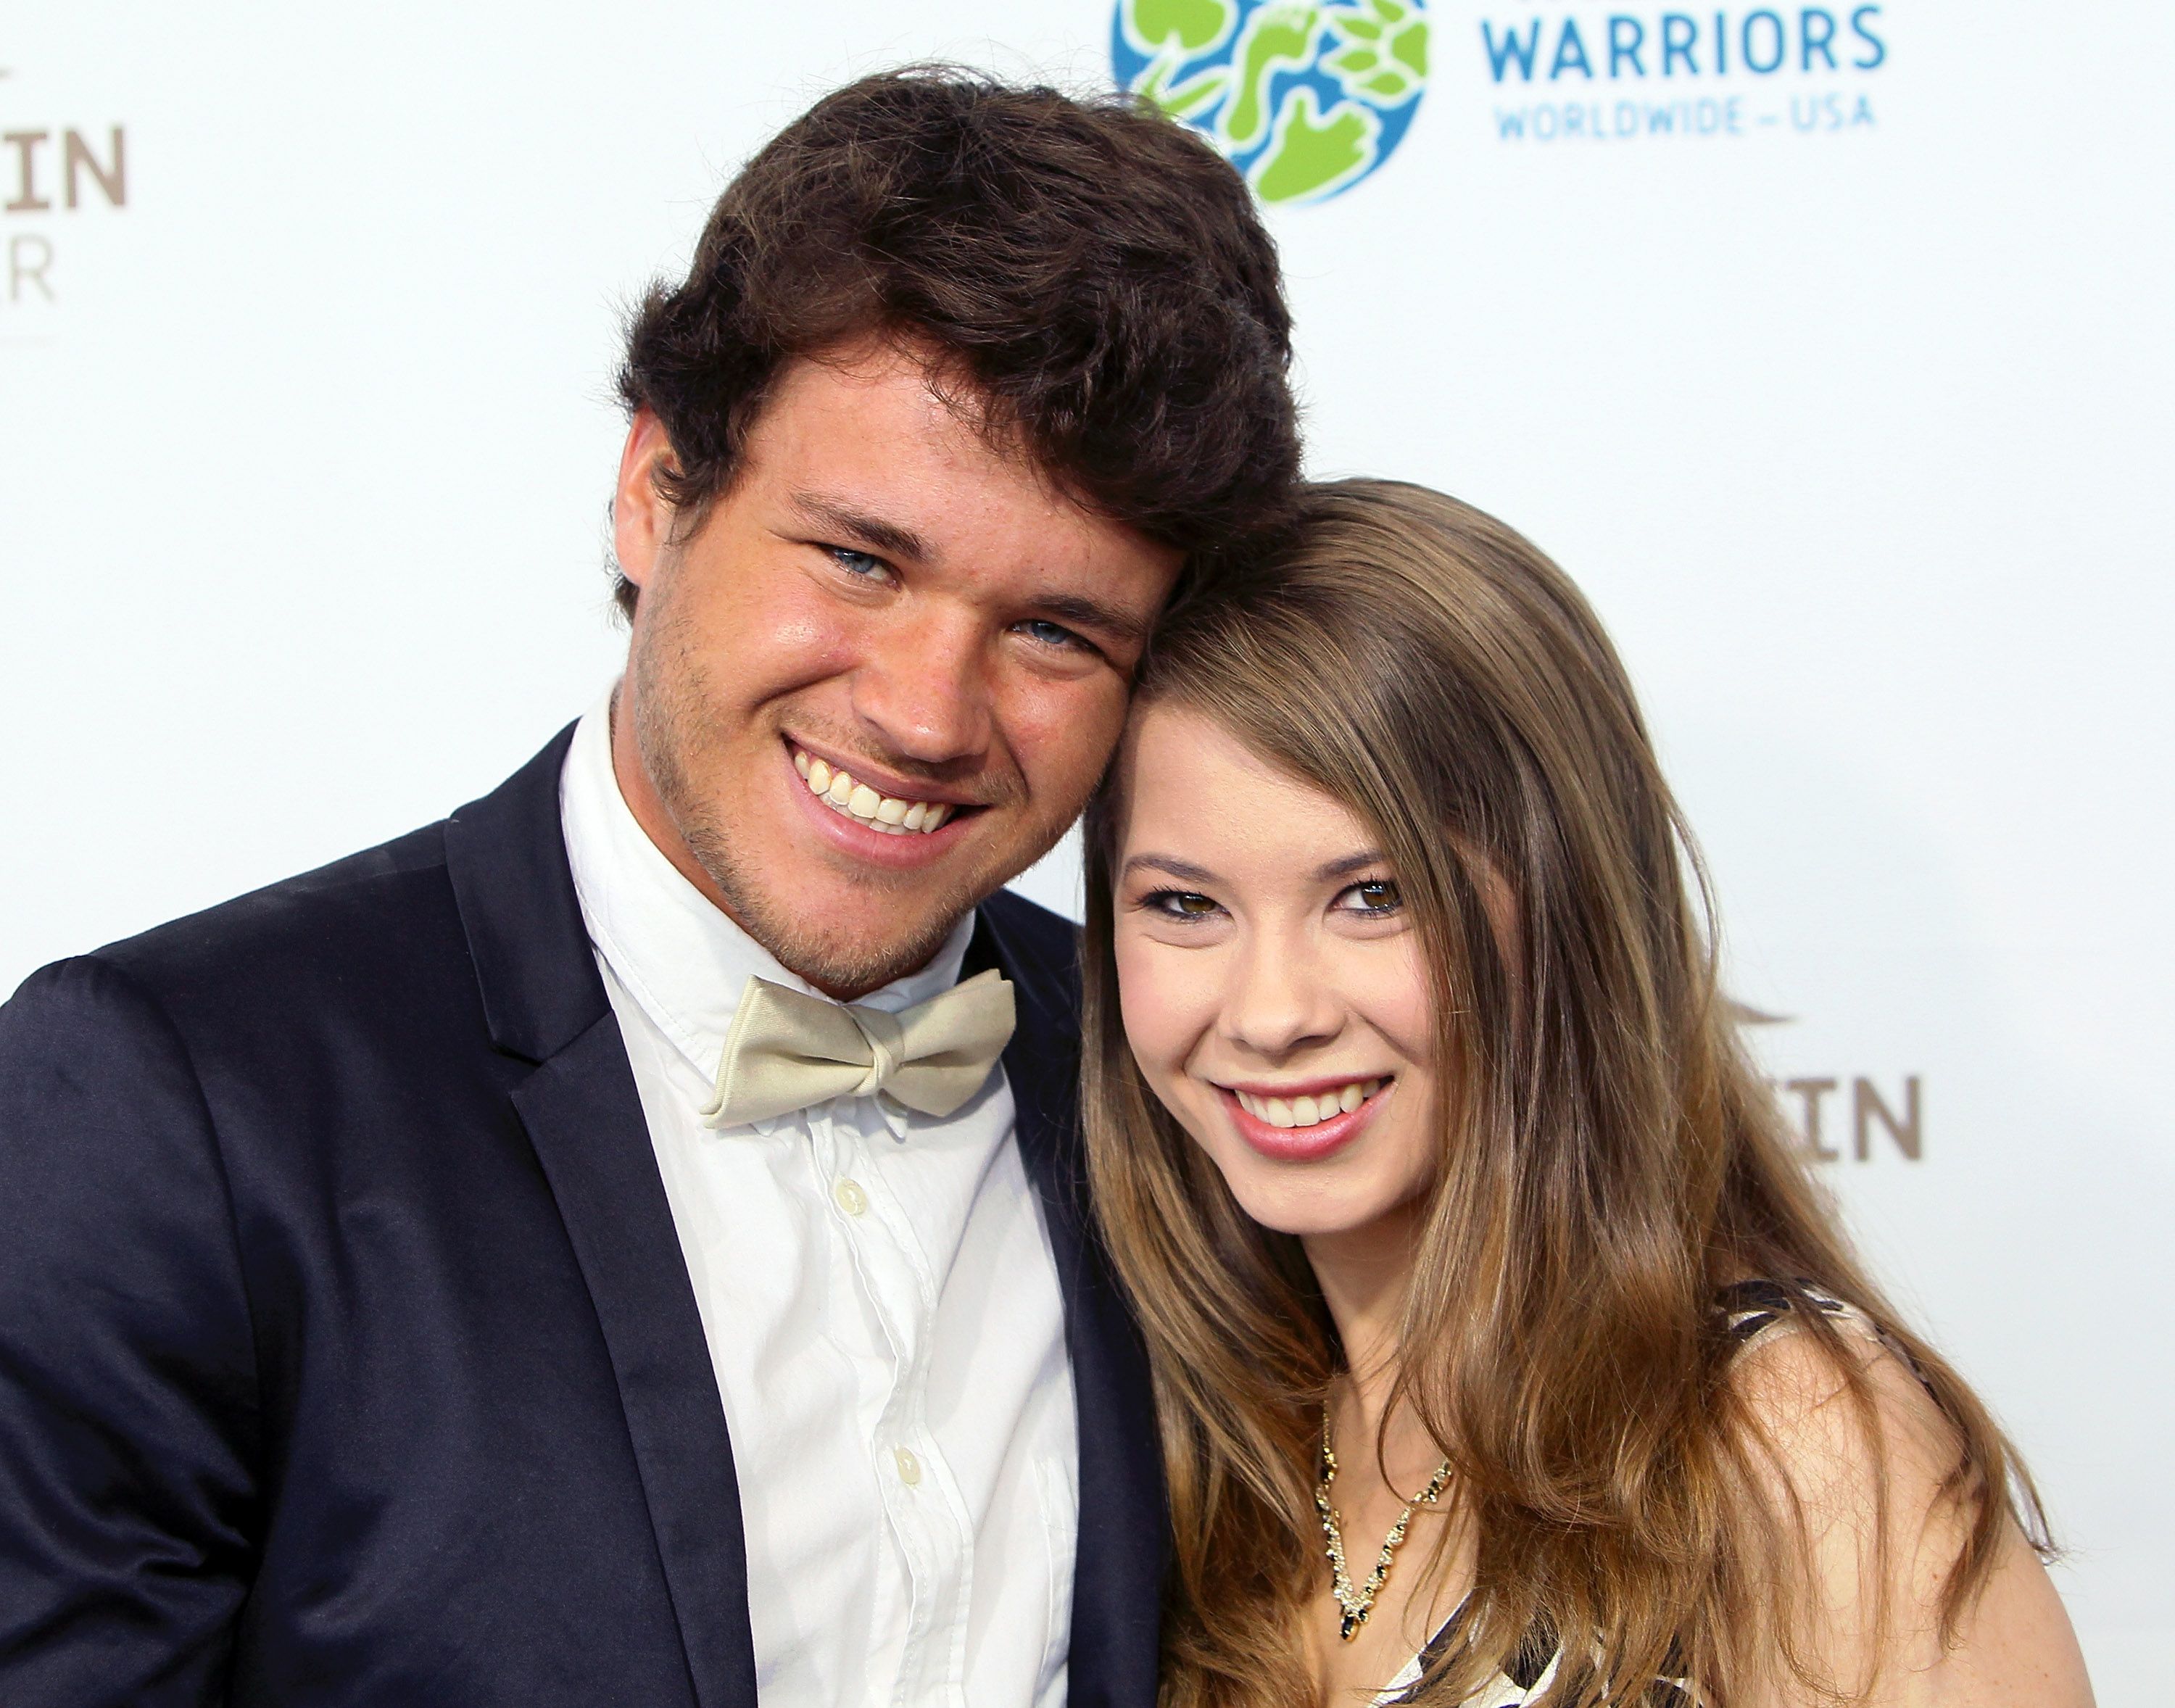 Chandler Powell and Bindi Irwin during the Steve Irwin Gala Dinner at JW Marriott Los Angeles at L.A. LIVE on May 21, 2016 in Los Angeles, California. | Source: Getty Images